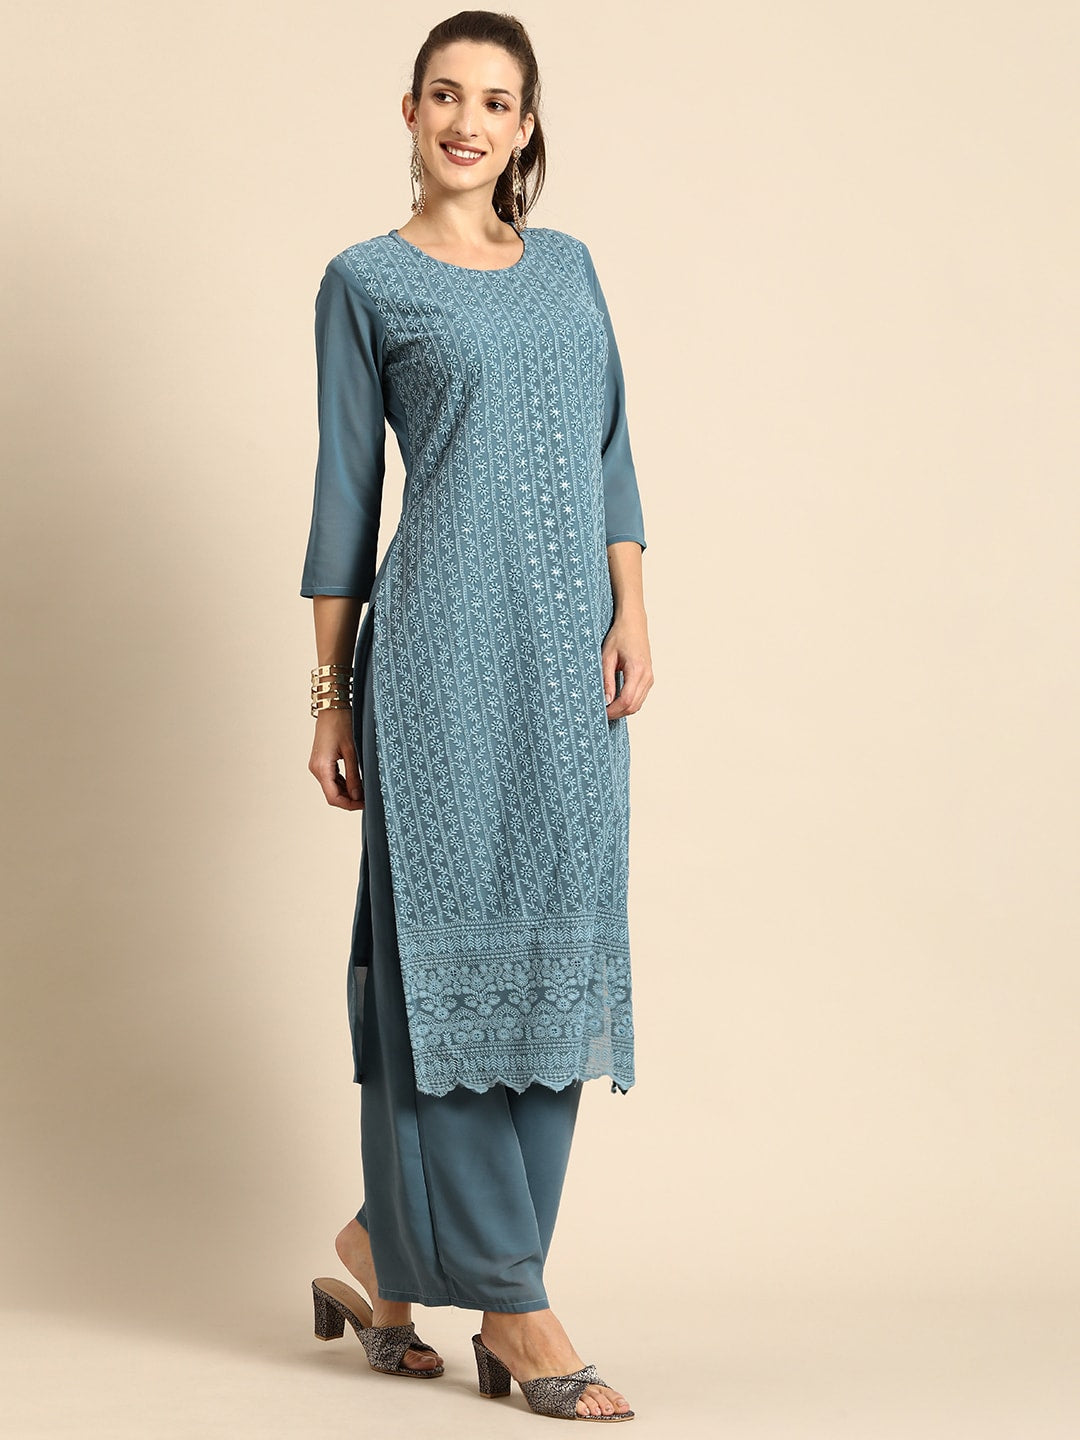 Dull Grey Georgette Chikan kurti with full boat neck design